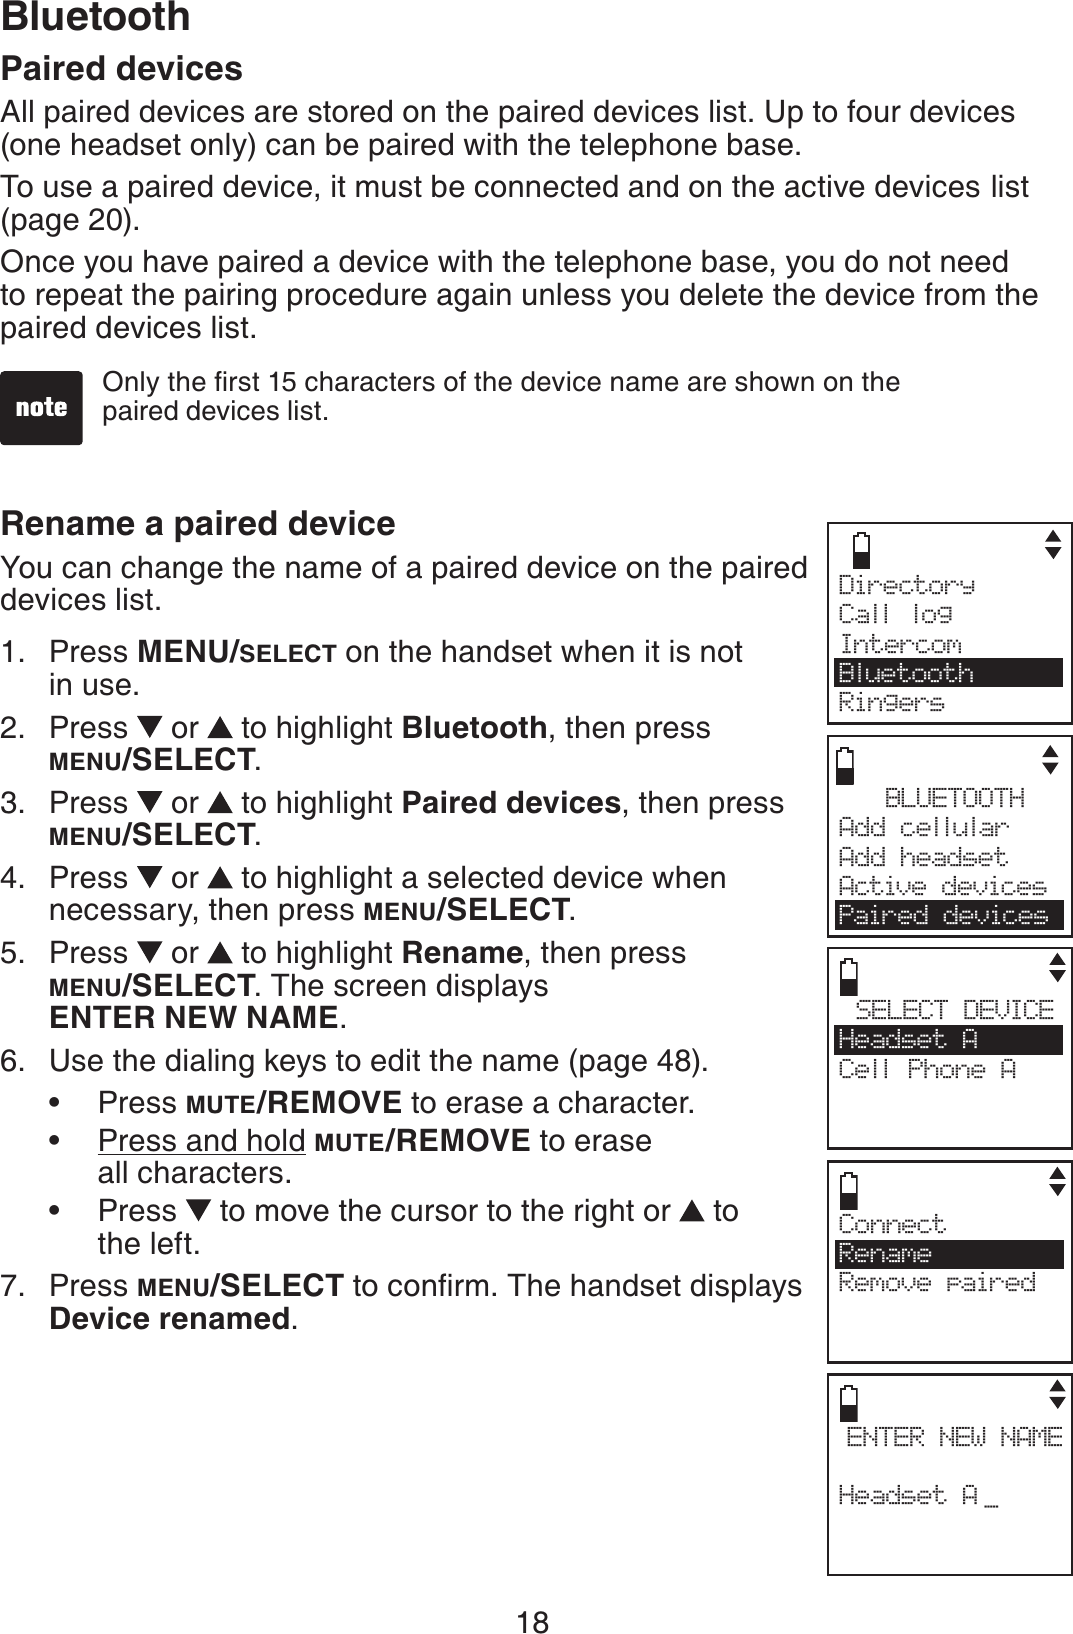 18BluetoothPaired devicesAll paired devices are stored on the paired devices list. Up to four devices (one headset only) can be paired with the telephone base.To use a paired device, it must be connected and on the active devices list (page 20).Once you have paired a device with the telephone base, you do not need to repeat the pairing procedure again unless you delete the device from the paired devices list.Rename a paired deviceYou can change the name of a paired device on the paired devices list.Press MENU/SELECT on the handset when it is not in use.Press   or  to highlight Bluetooth, then press MENU/SELECT.Press   or  to highlight Paired devices, then press MENU/SELECT.Press   or  to highlight a selected device when necessary, then press MENU/SELECT.Press   or  to highlight Rename, then press MENU/SELECT. The screen displays ENTER NEW NAME.Use the dialing keys to edit the name (page 48).Press MUTE/REMOVE to erase a character.Press and hold MUTE/REMOVE to erase all characters.Press   to move the cursor to the right or  to the left.Press MENU/SELECTVQEQPſTO6JGJCPFUGVFKURNC[UDevice renamed.1.2.3.4.5.6.•••7.1PN[VJGſTUVEJCTCEVGTUQHVJGFGXKEGPCOGCTGUJQYPQPVJGpaired devices list.BLUETOOTHAdd cellular Add headsetActive devicesPaired devicesSELECT DEVICEHeadset ACell Phone ACENTER NEW NAMEHeadset A _ConnectRenameRemove pairedDirectory Call logIntercomBluetoothRingers